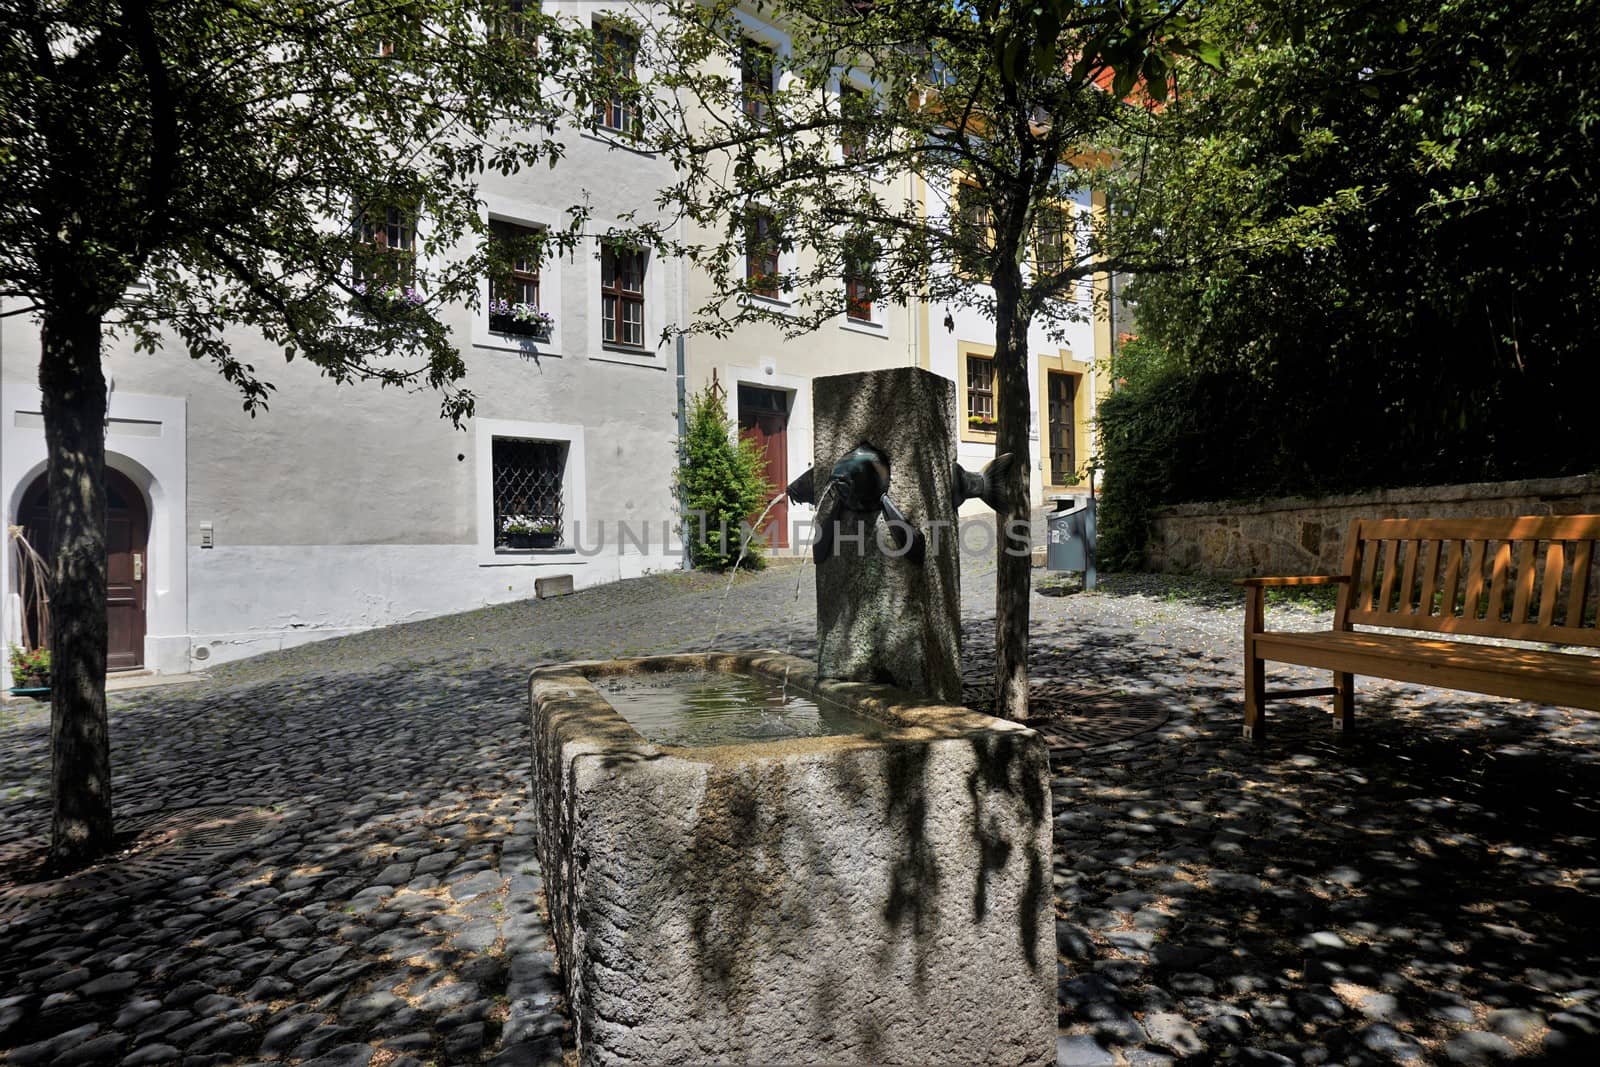 Carp fountain on a small square in the Karpfengrund street, Goerlitz by pisces2386